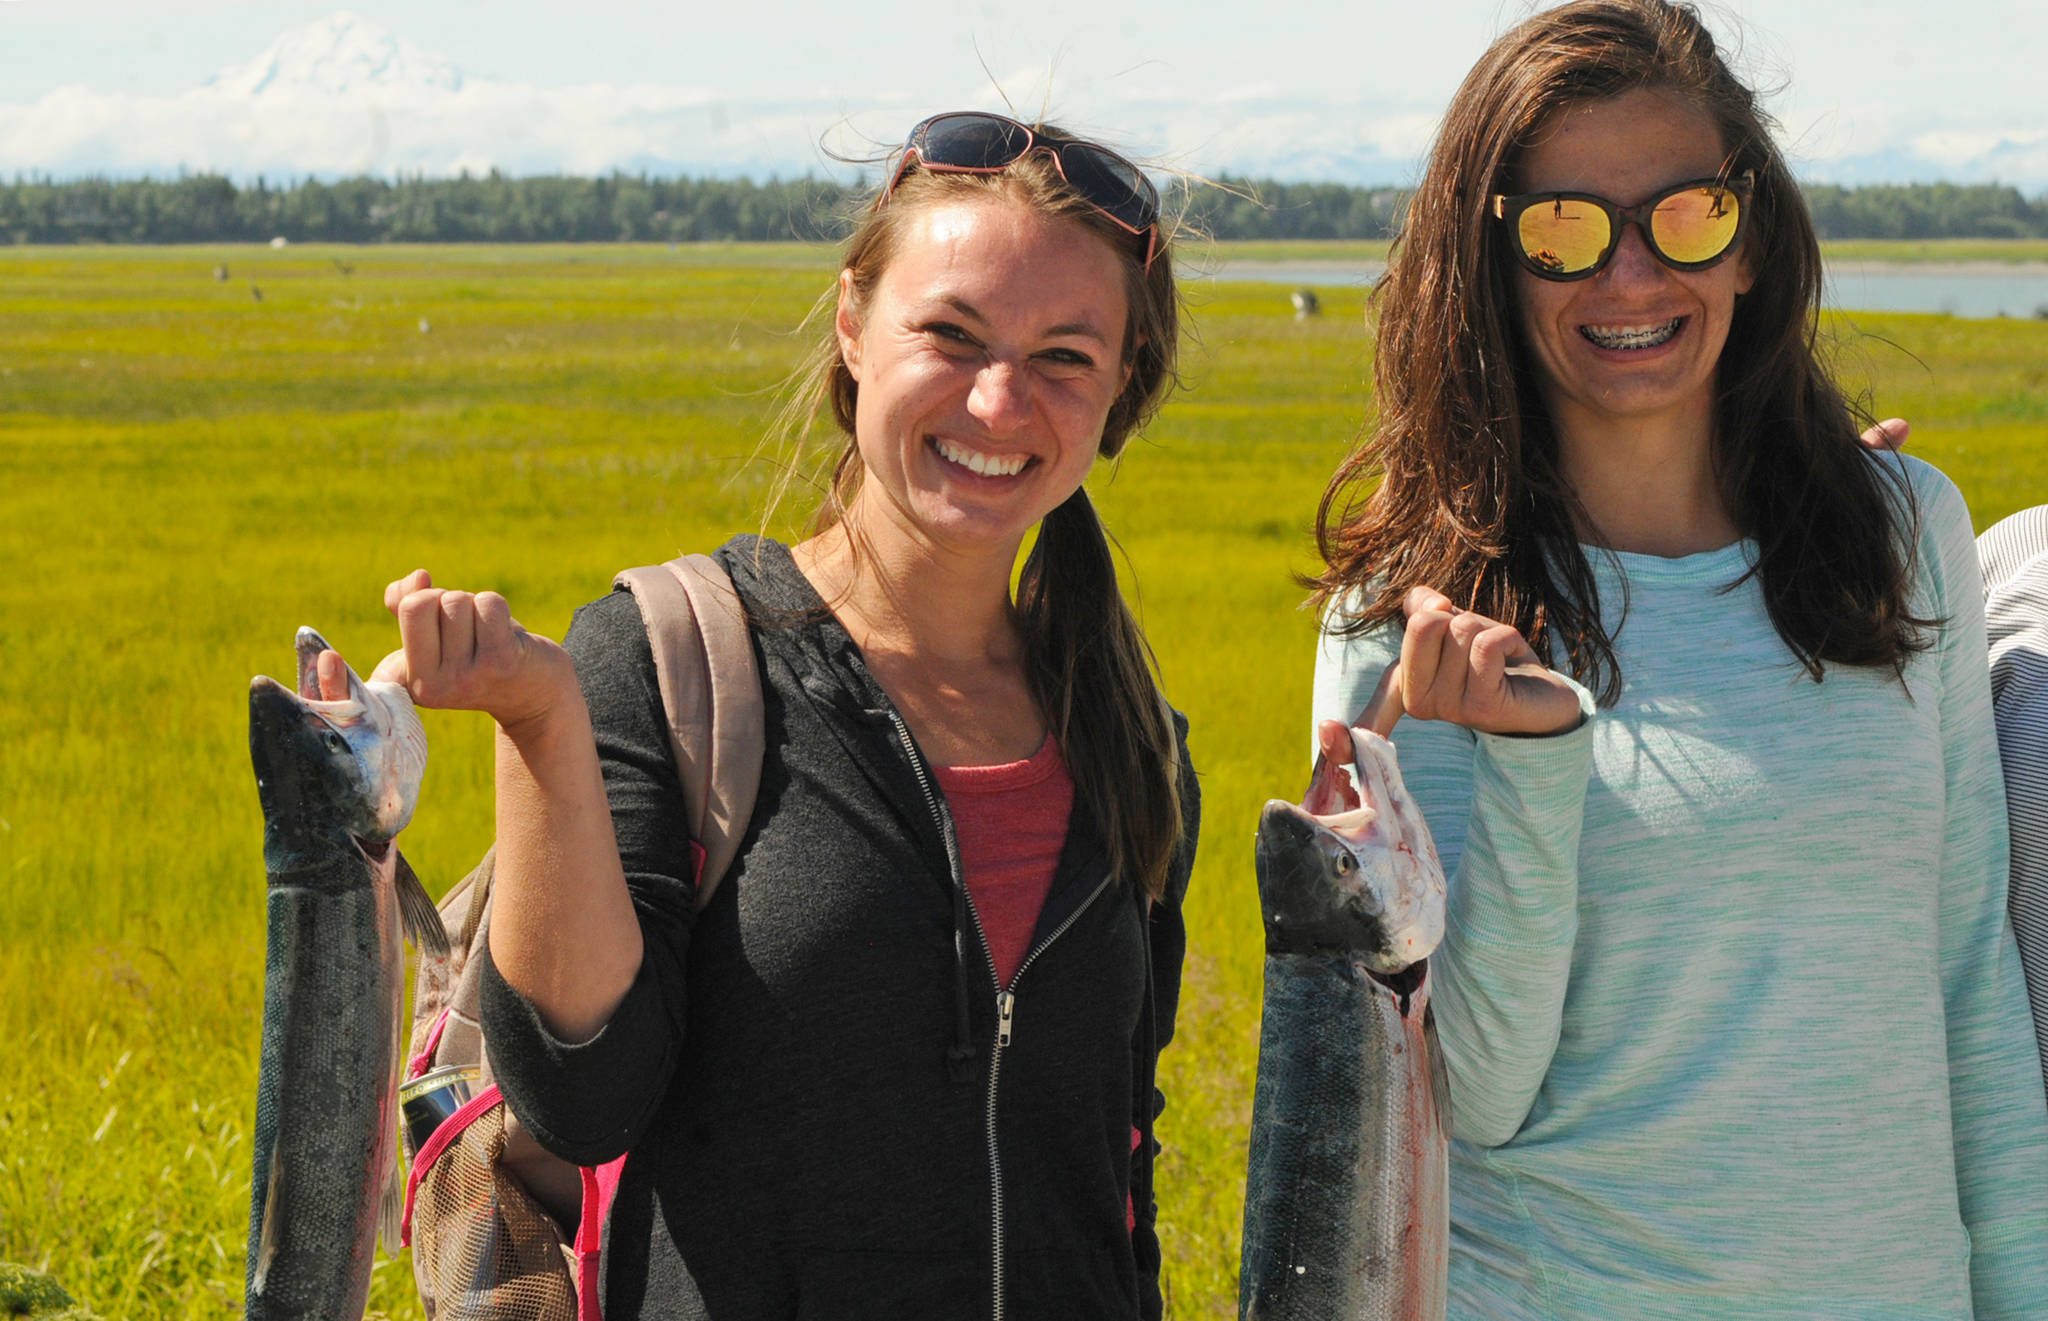 Anchorage residents Megen Draeger (left) and Athena Mallis (right) hold up the sockeye salmon they caught dipnetting in the Kenai River on Saturday, July 21, 2018 in Kenai, Alaska. (Photo by Elizabeth Earl/Peninsula Clarion)